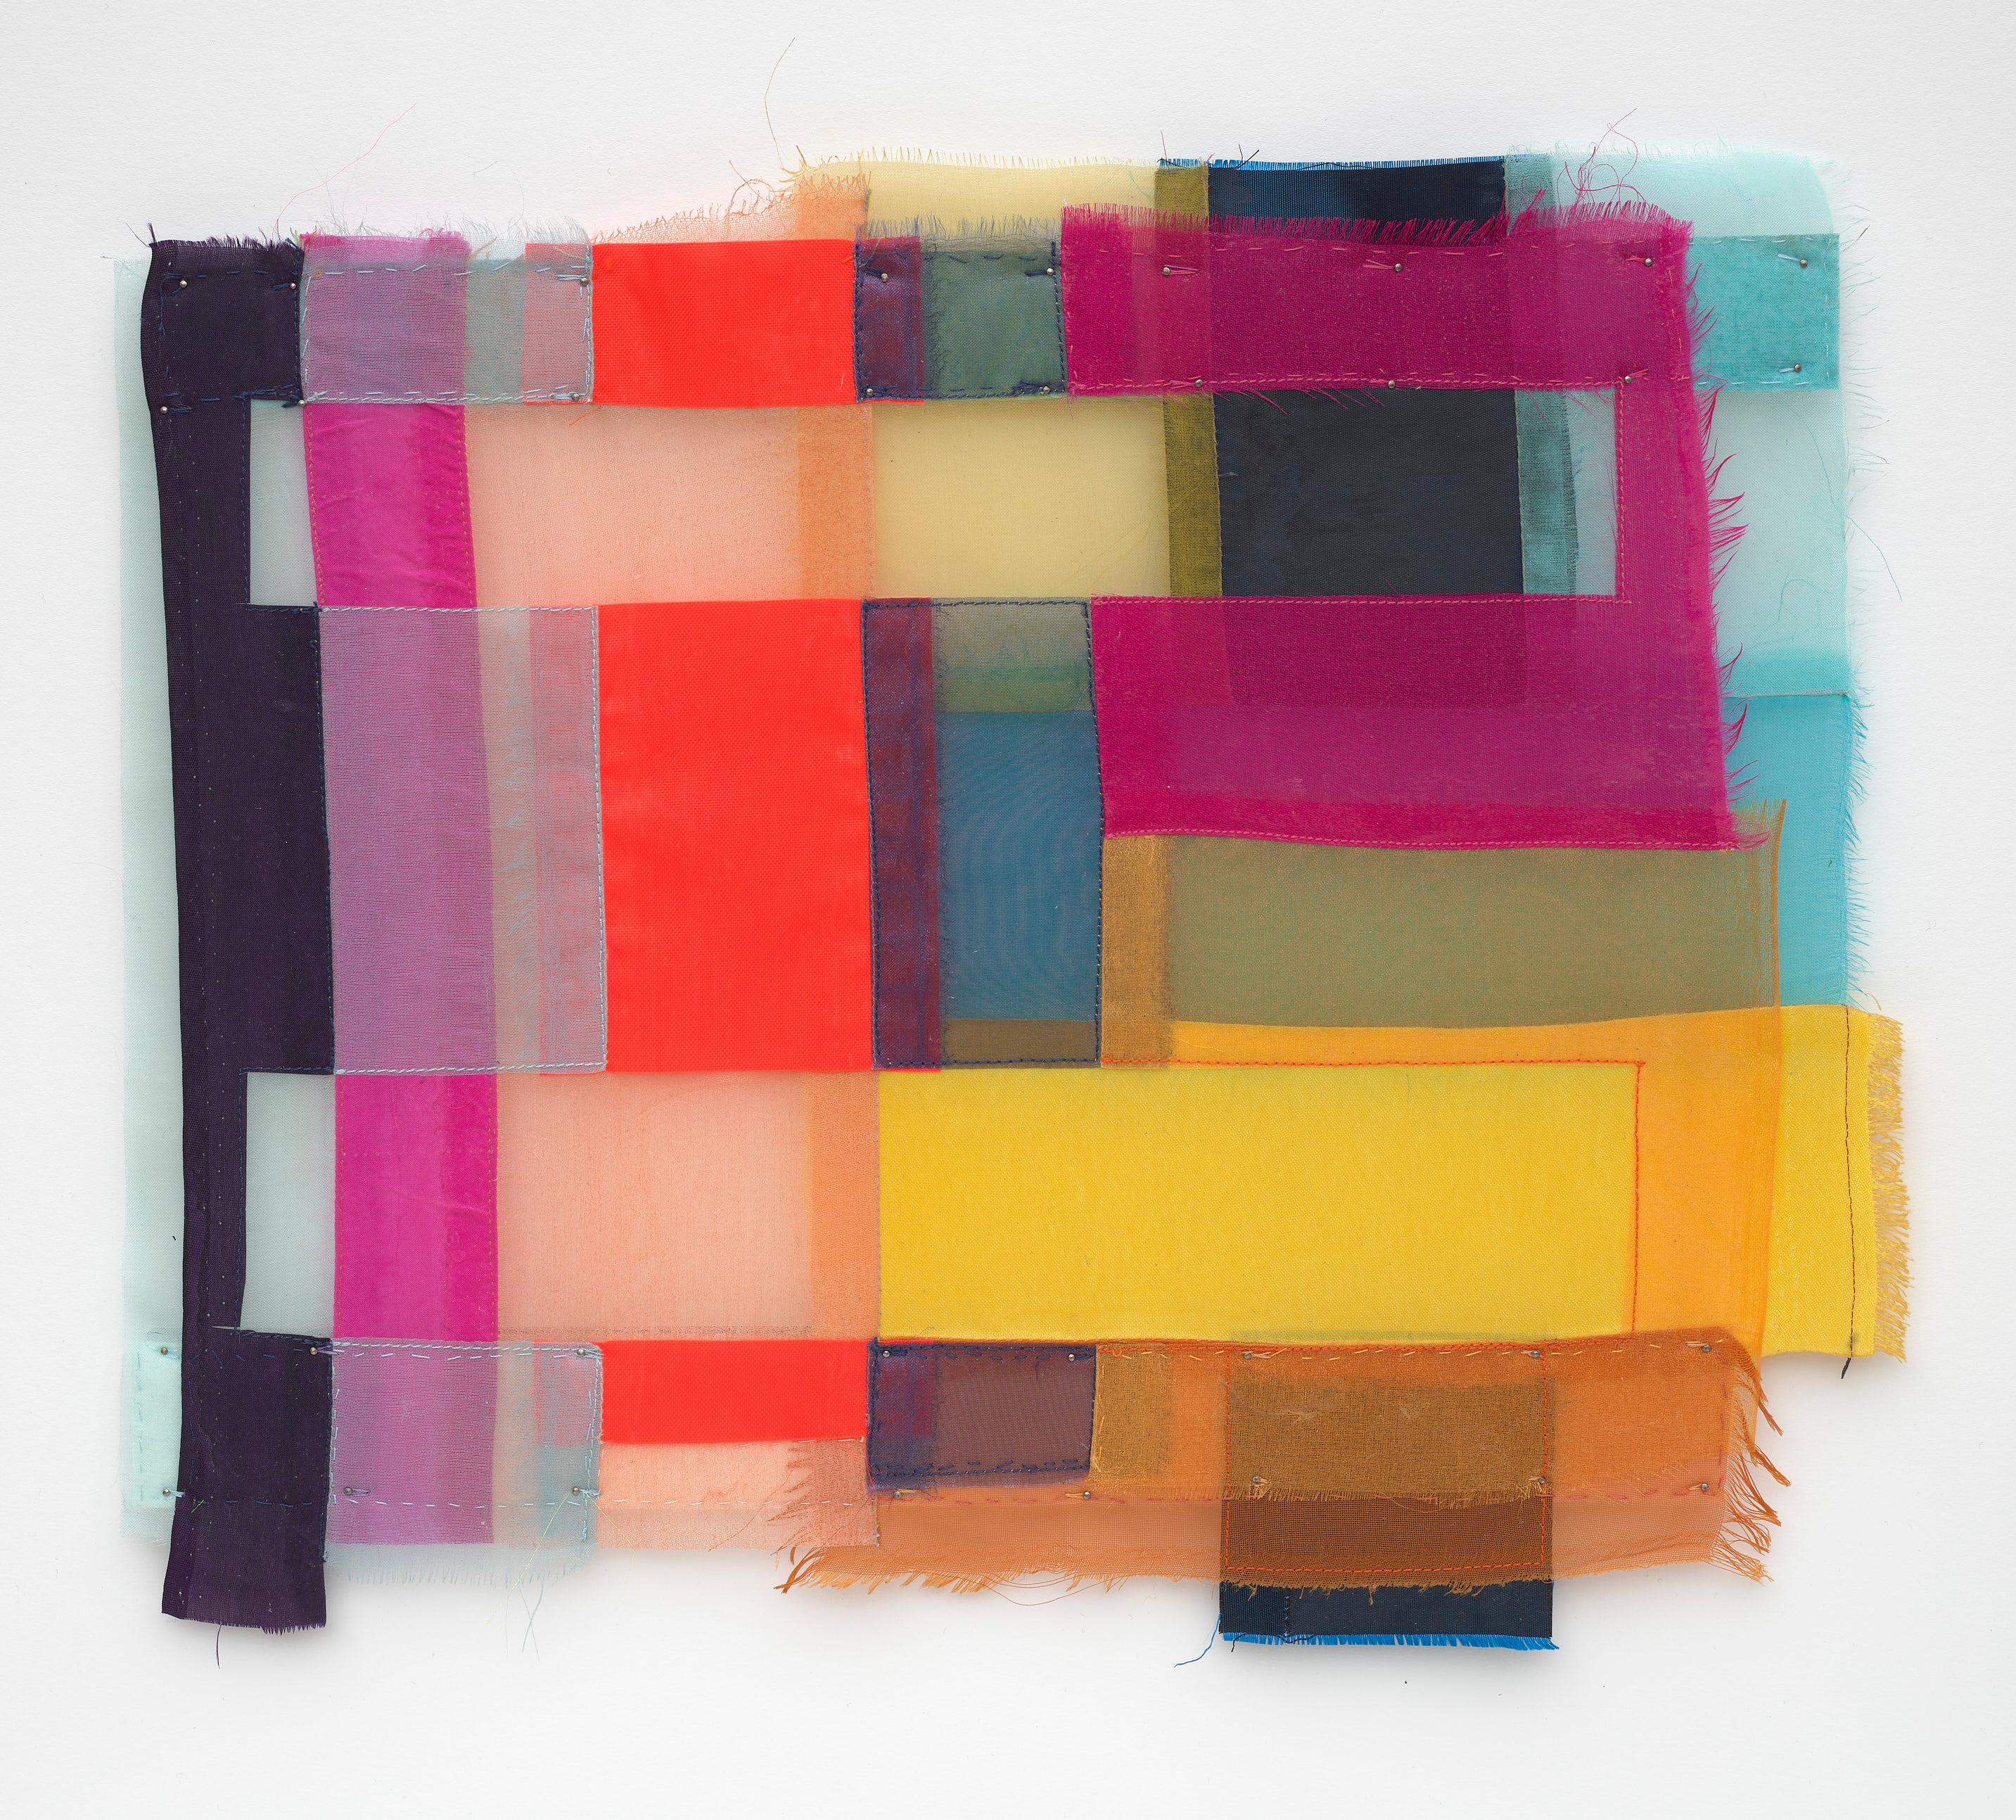 Peek, 2023, vibrant, jewel-like, diaphanous strips of fabric collages